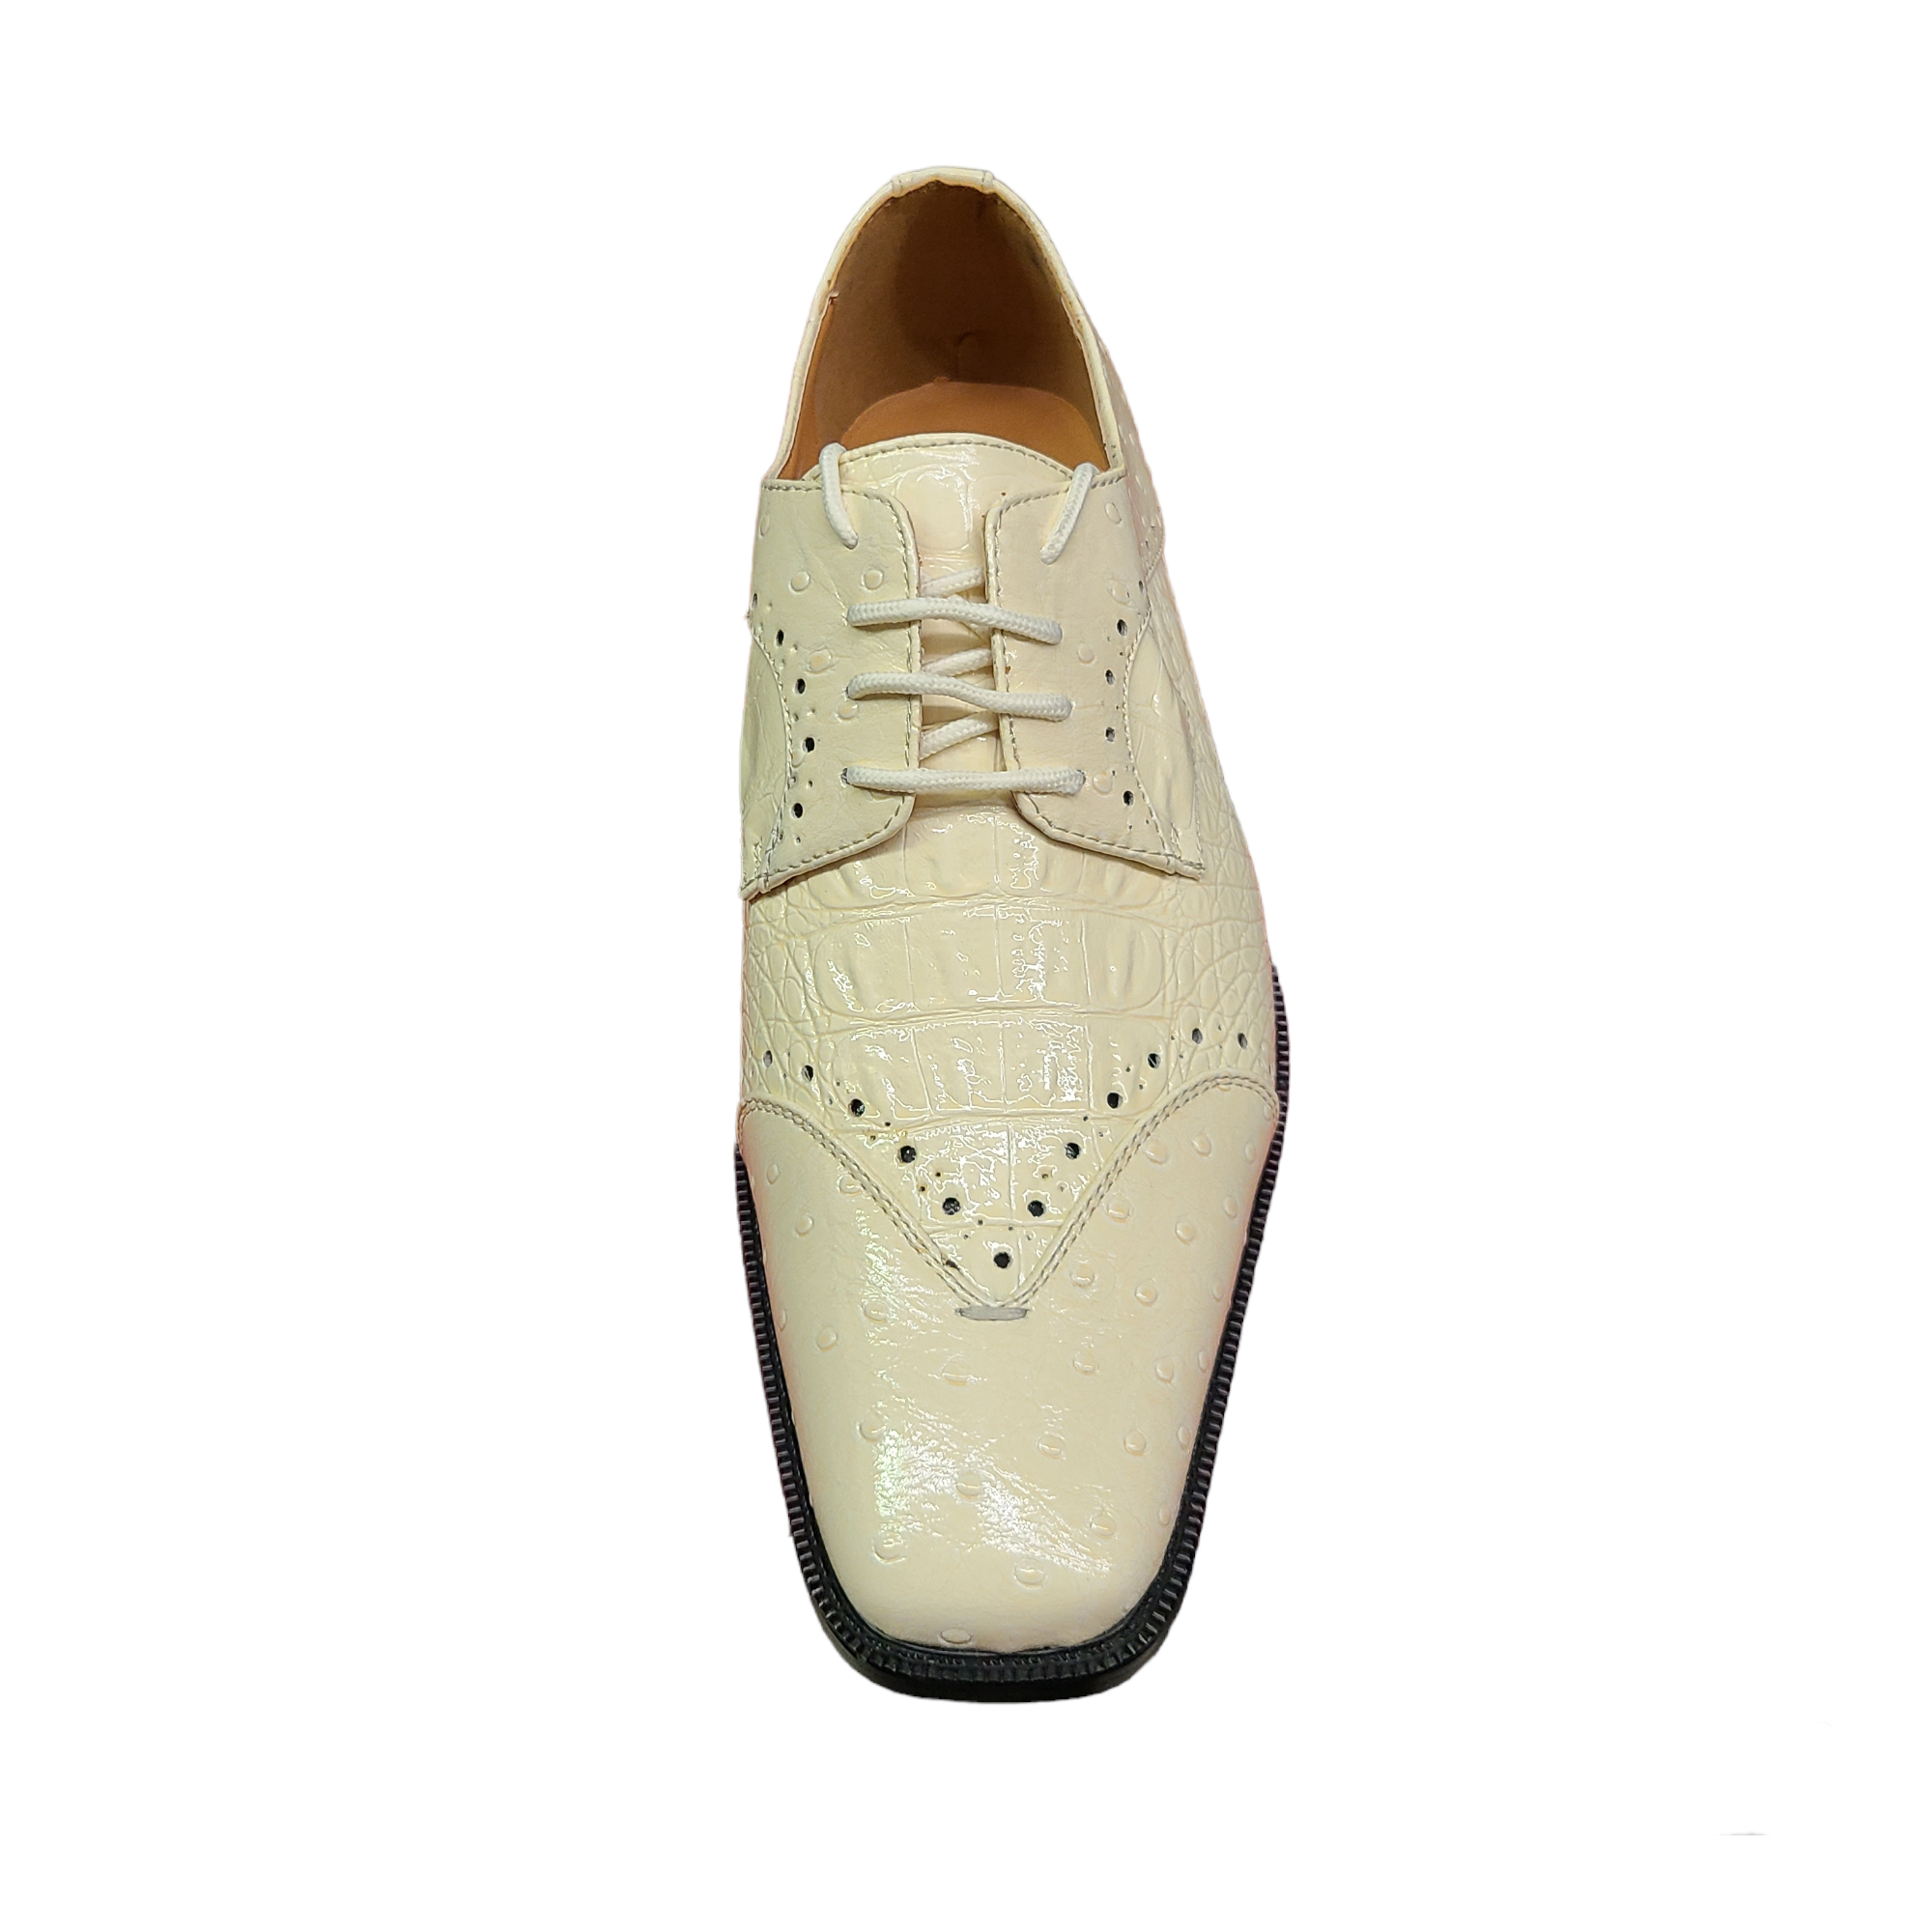 Roberto Chillini Lace Up Dress Shoes - Clearance